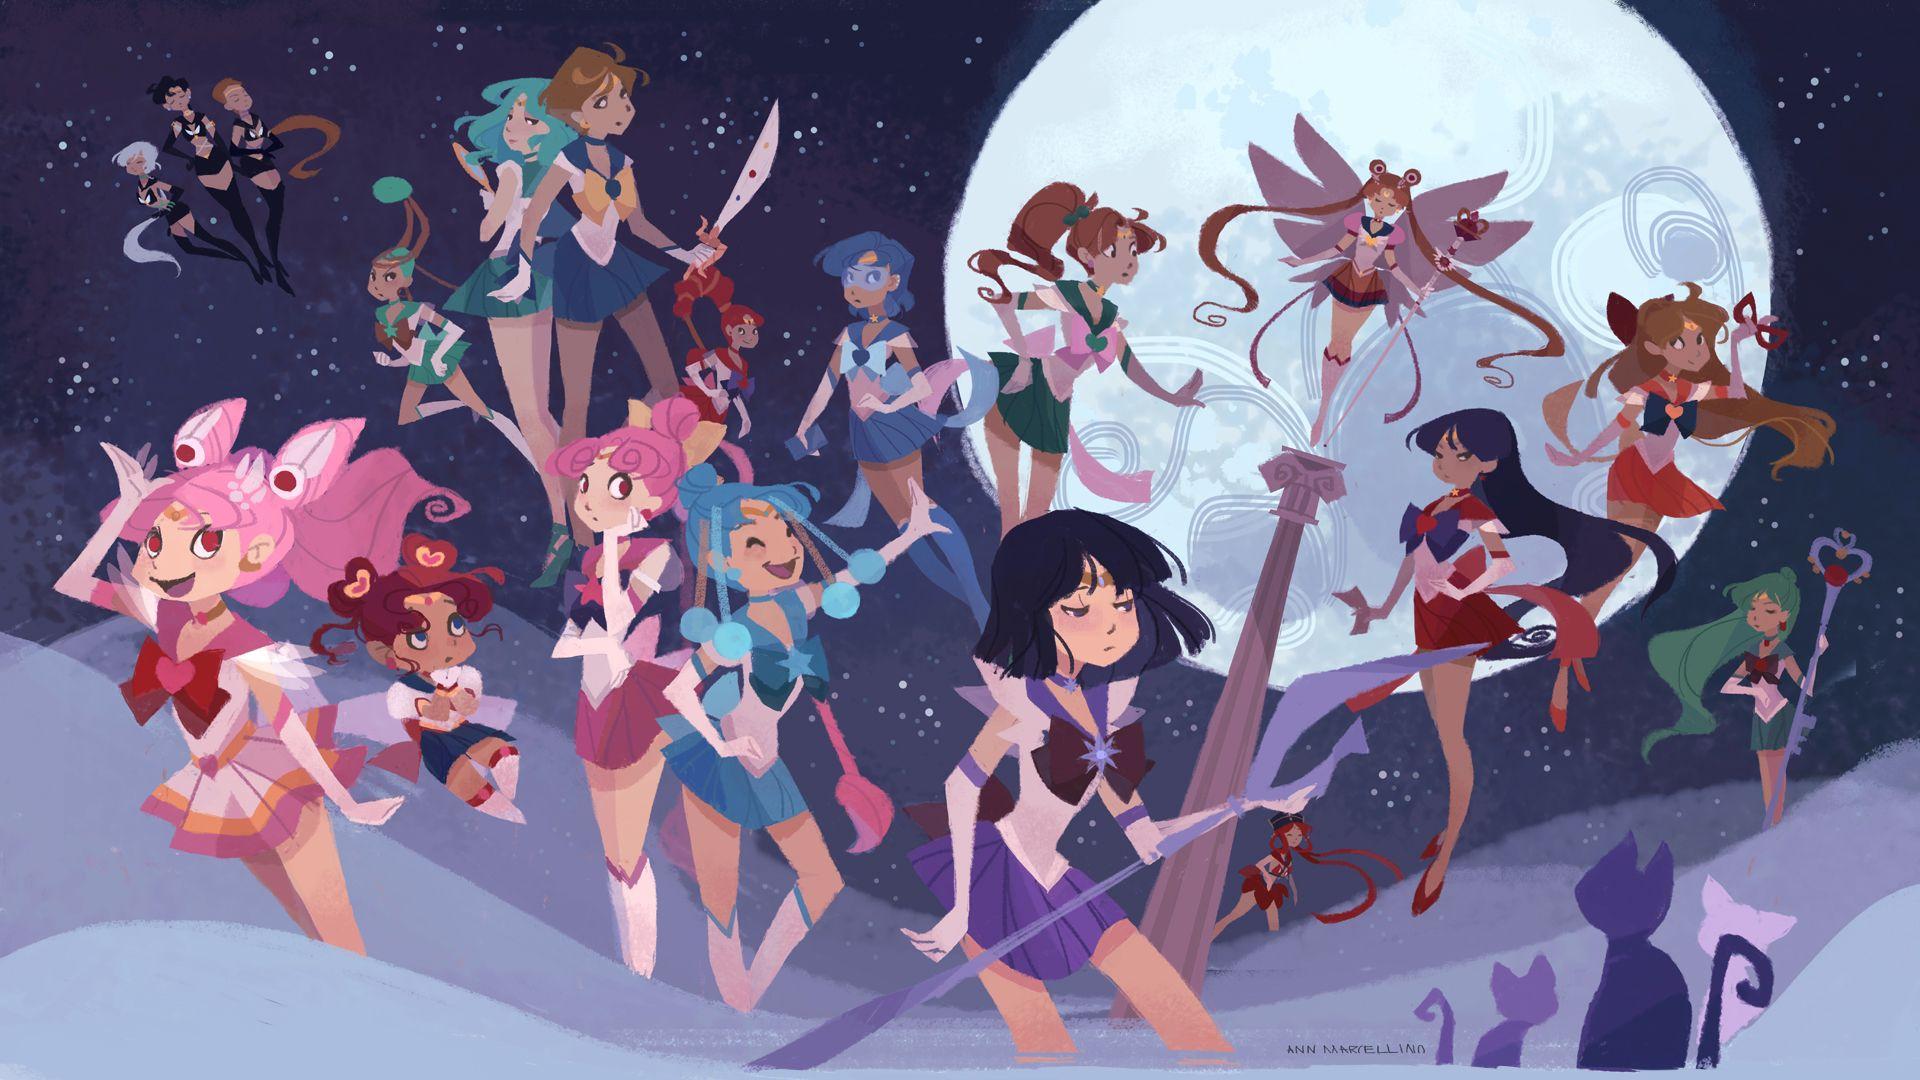 A digital art of the different sailor scouts from the Sailor Moon series. - Sailor Moon